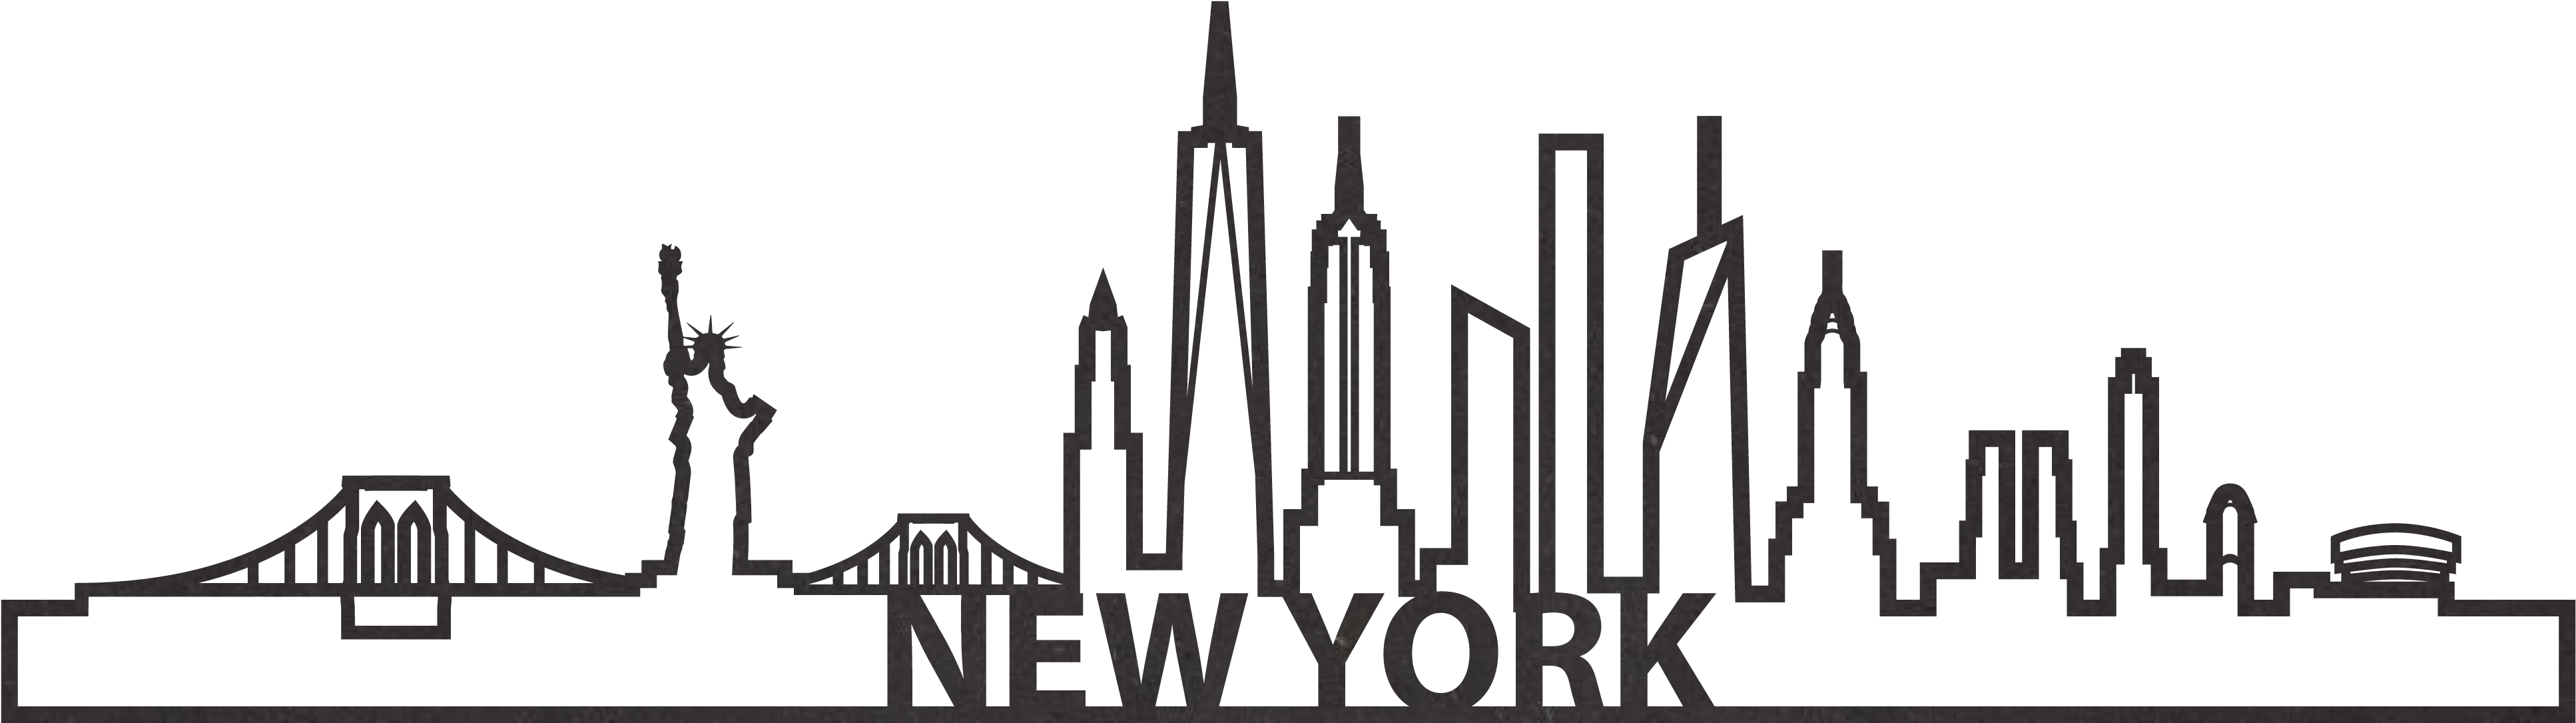 Download New York City Skyline Silhouette | Wallpapers.com